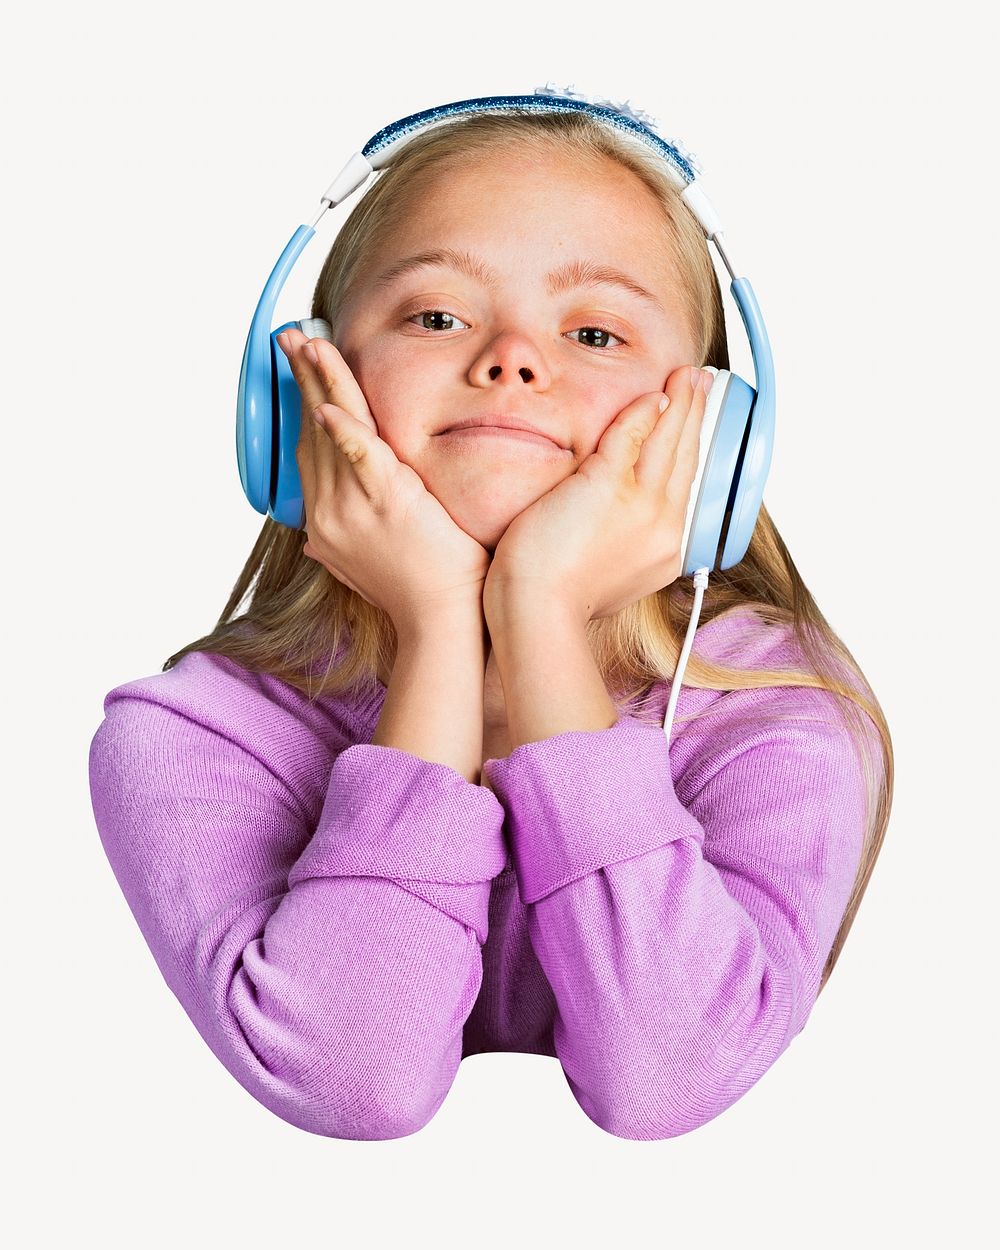 Girl listening to music isolated image on white